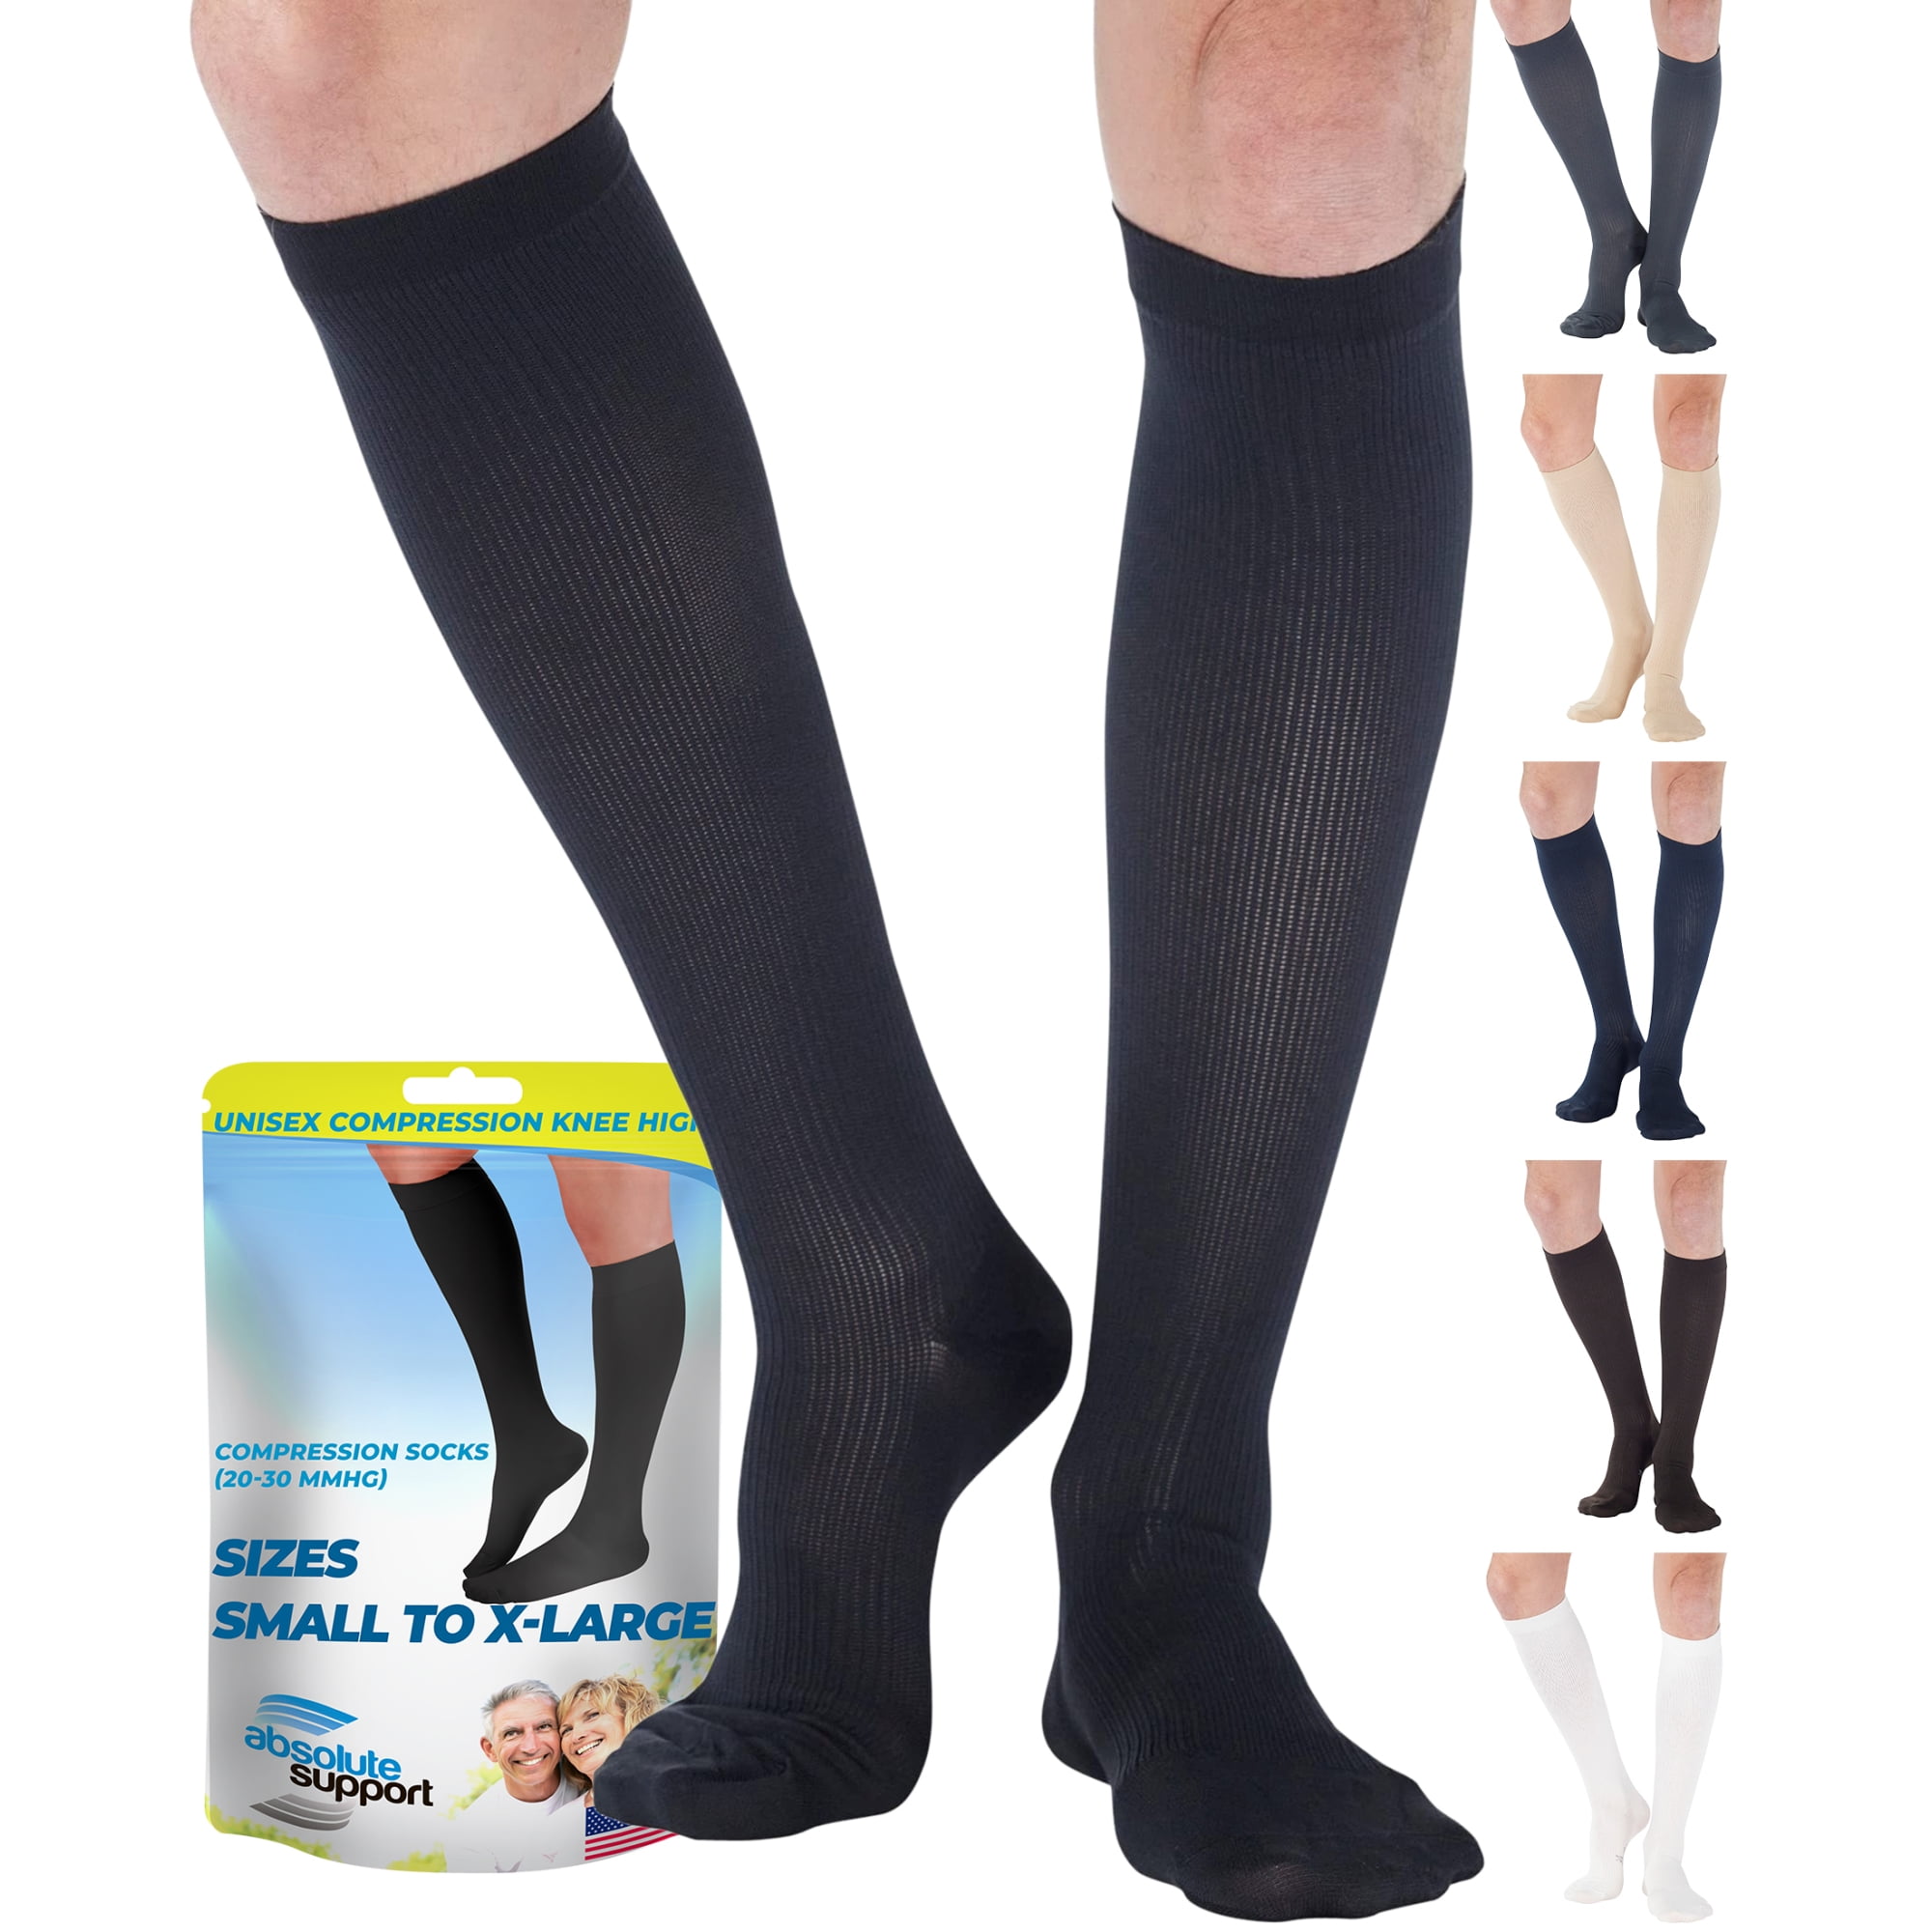 Absolute Support - Made in USA - Size 3X-Large - Sheer Compression Socks  for Women Circulation 15-20 mmHg - Lightweight Long Compression Knee High  Support Stockings for Ladies - Black : : Health & Personal Care